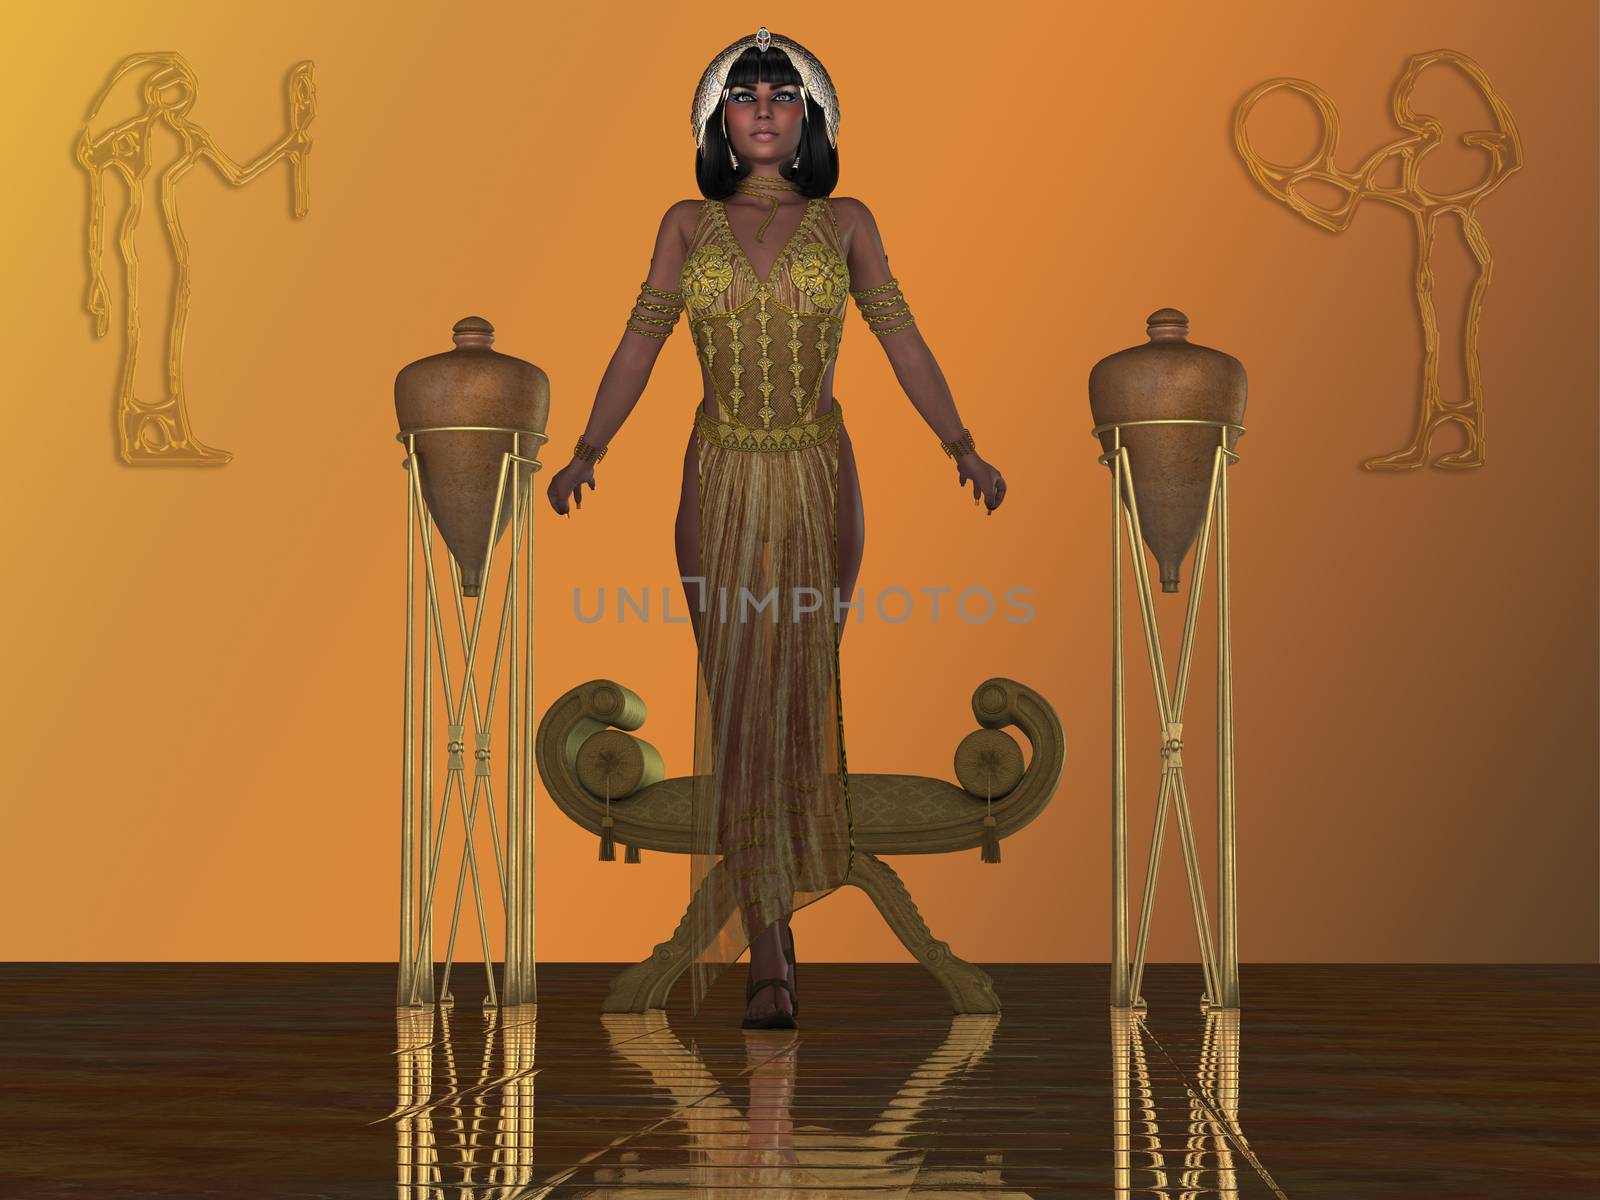 An Egyptian princess arises from a chair in a temple dressed in traditional gown and headdress from that era.